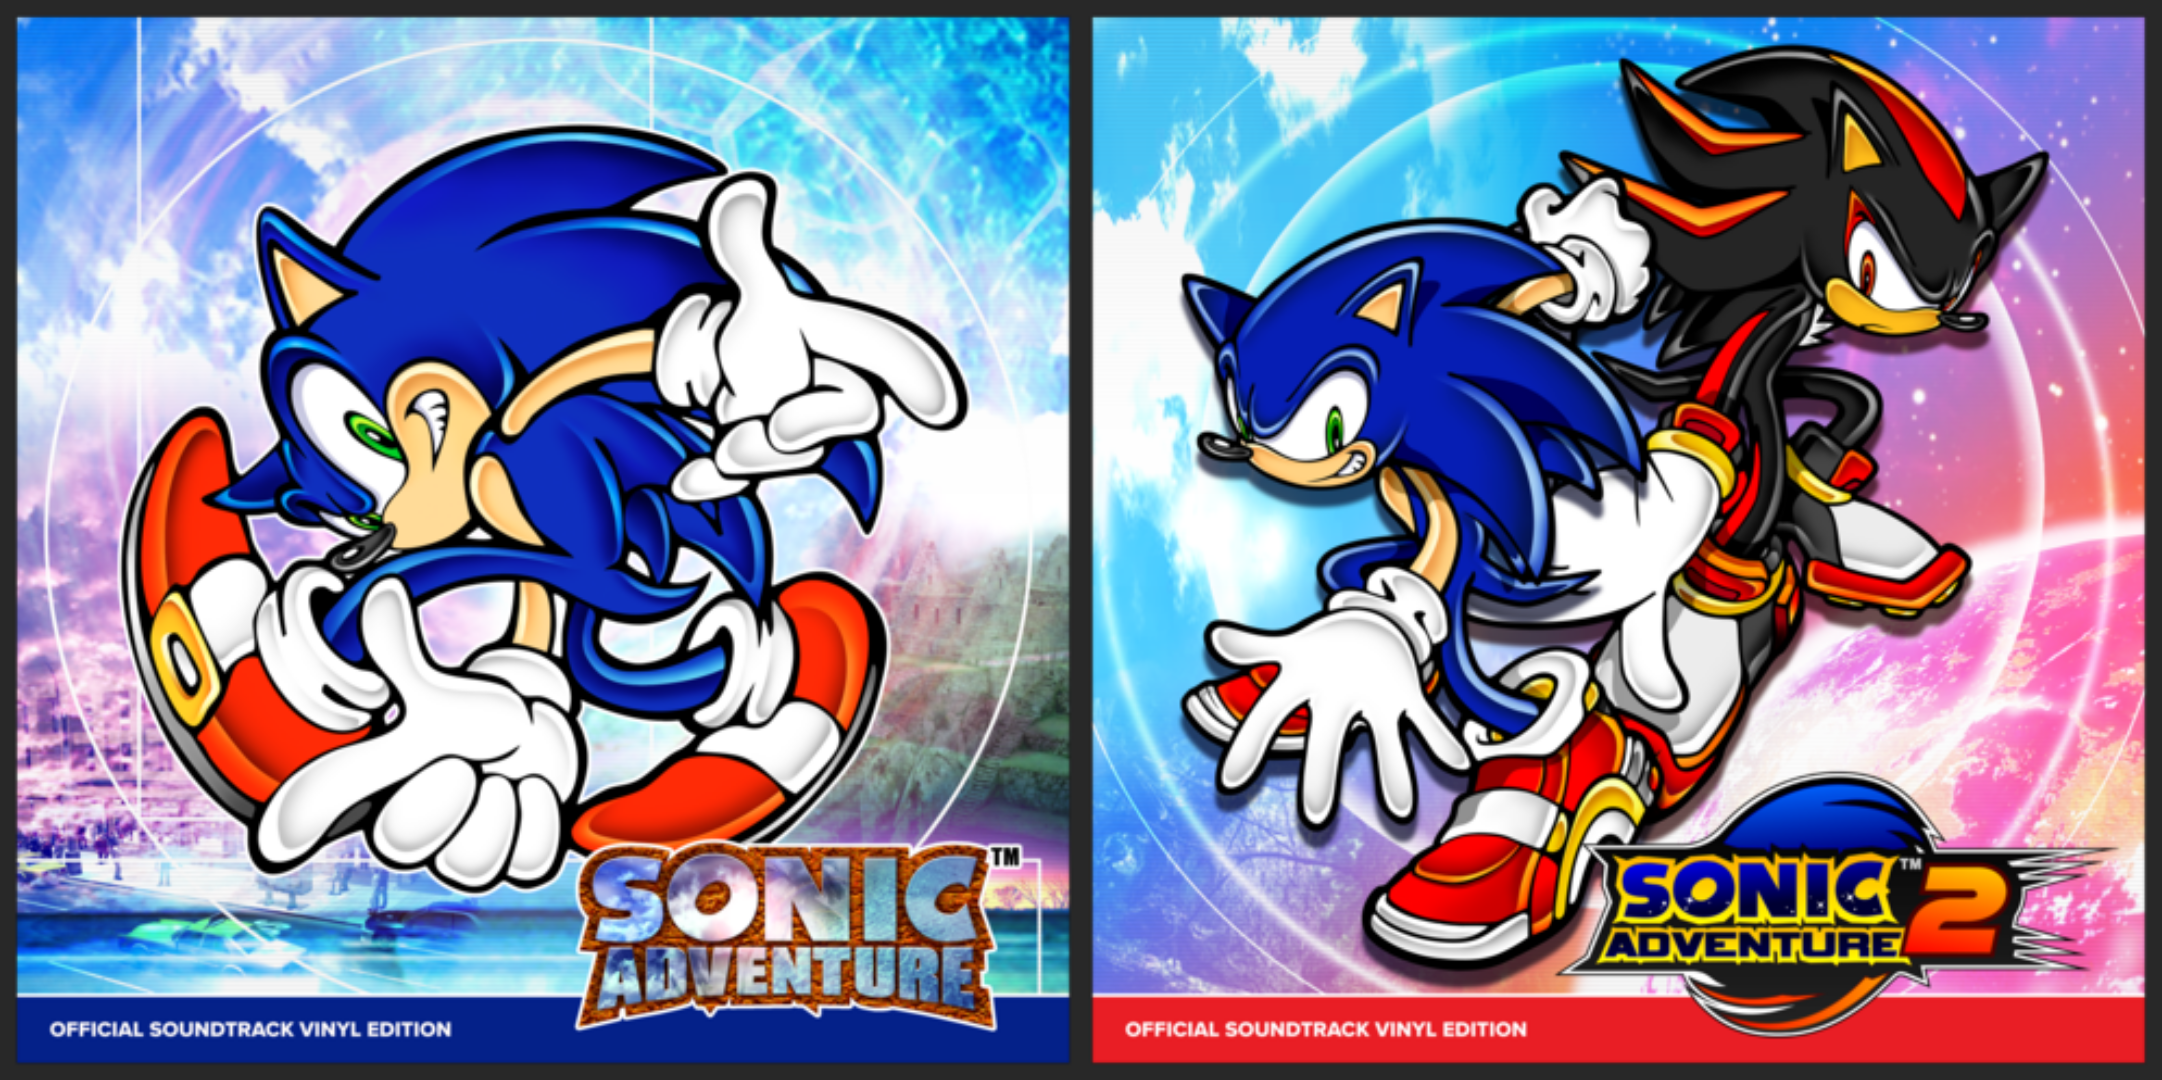 Sonic Adventure 1 & 2 Getting Vinyl Collections